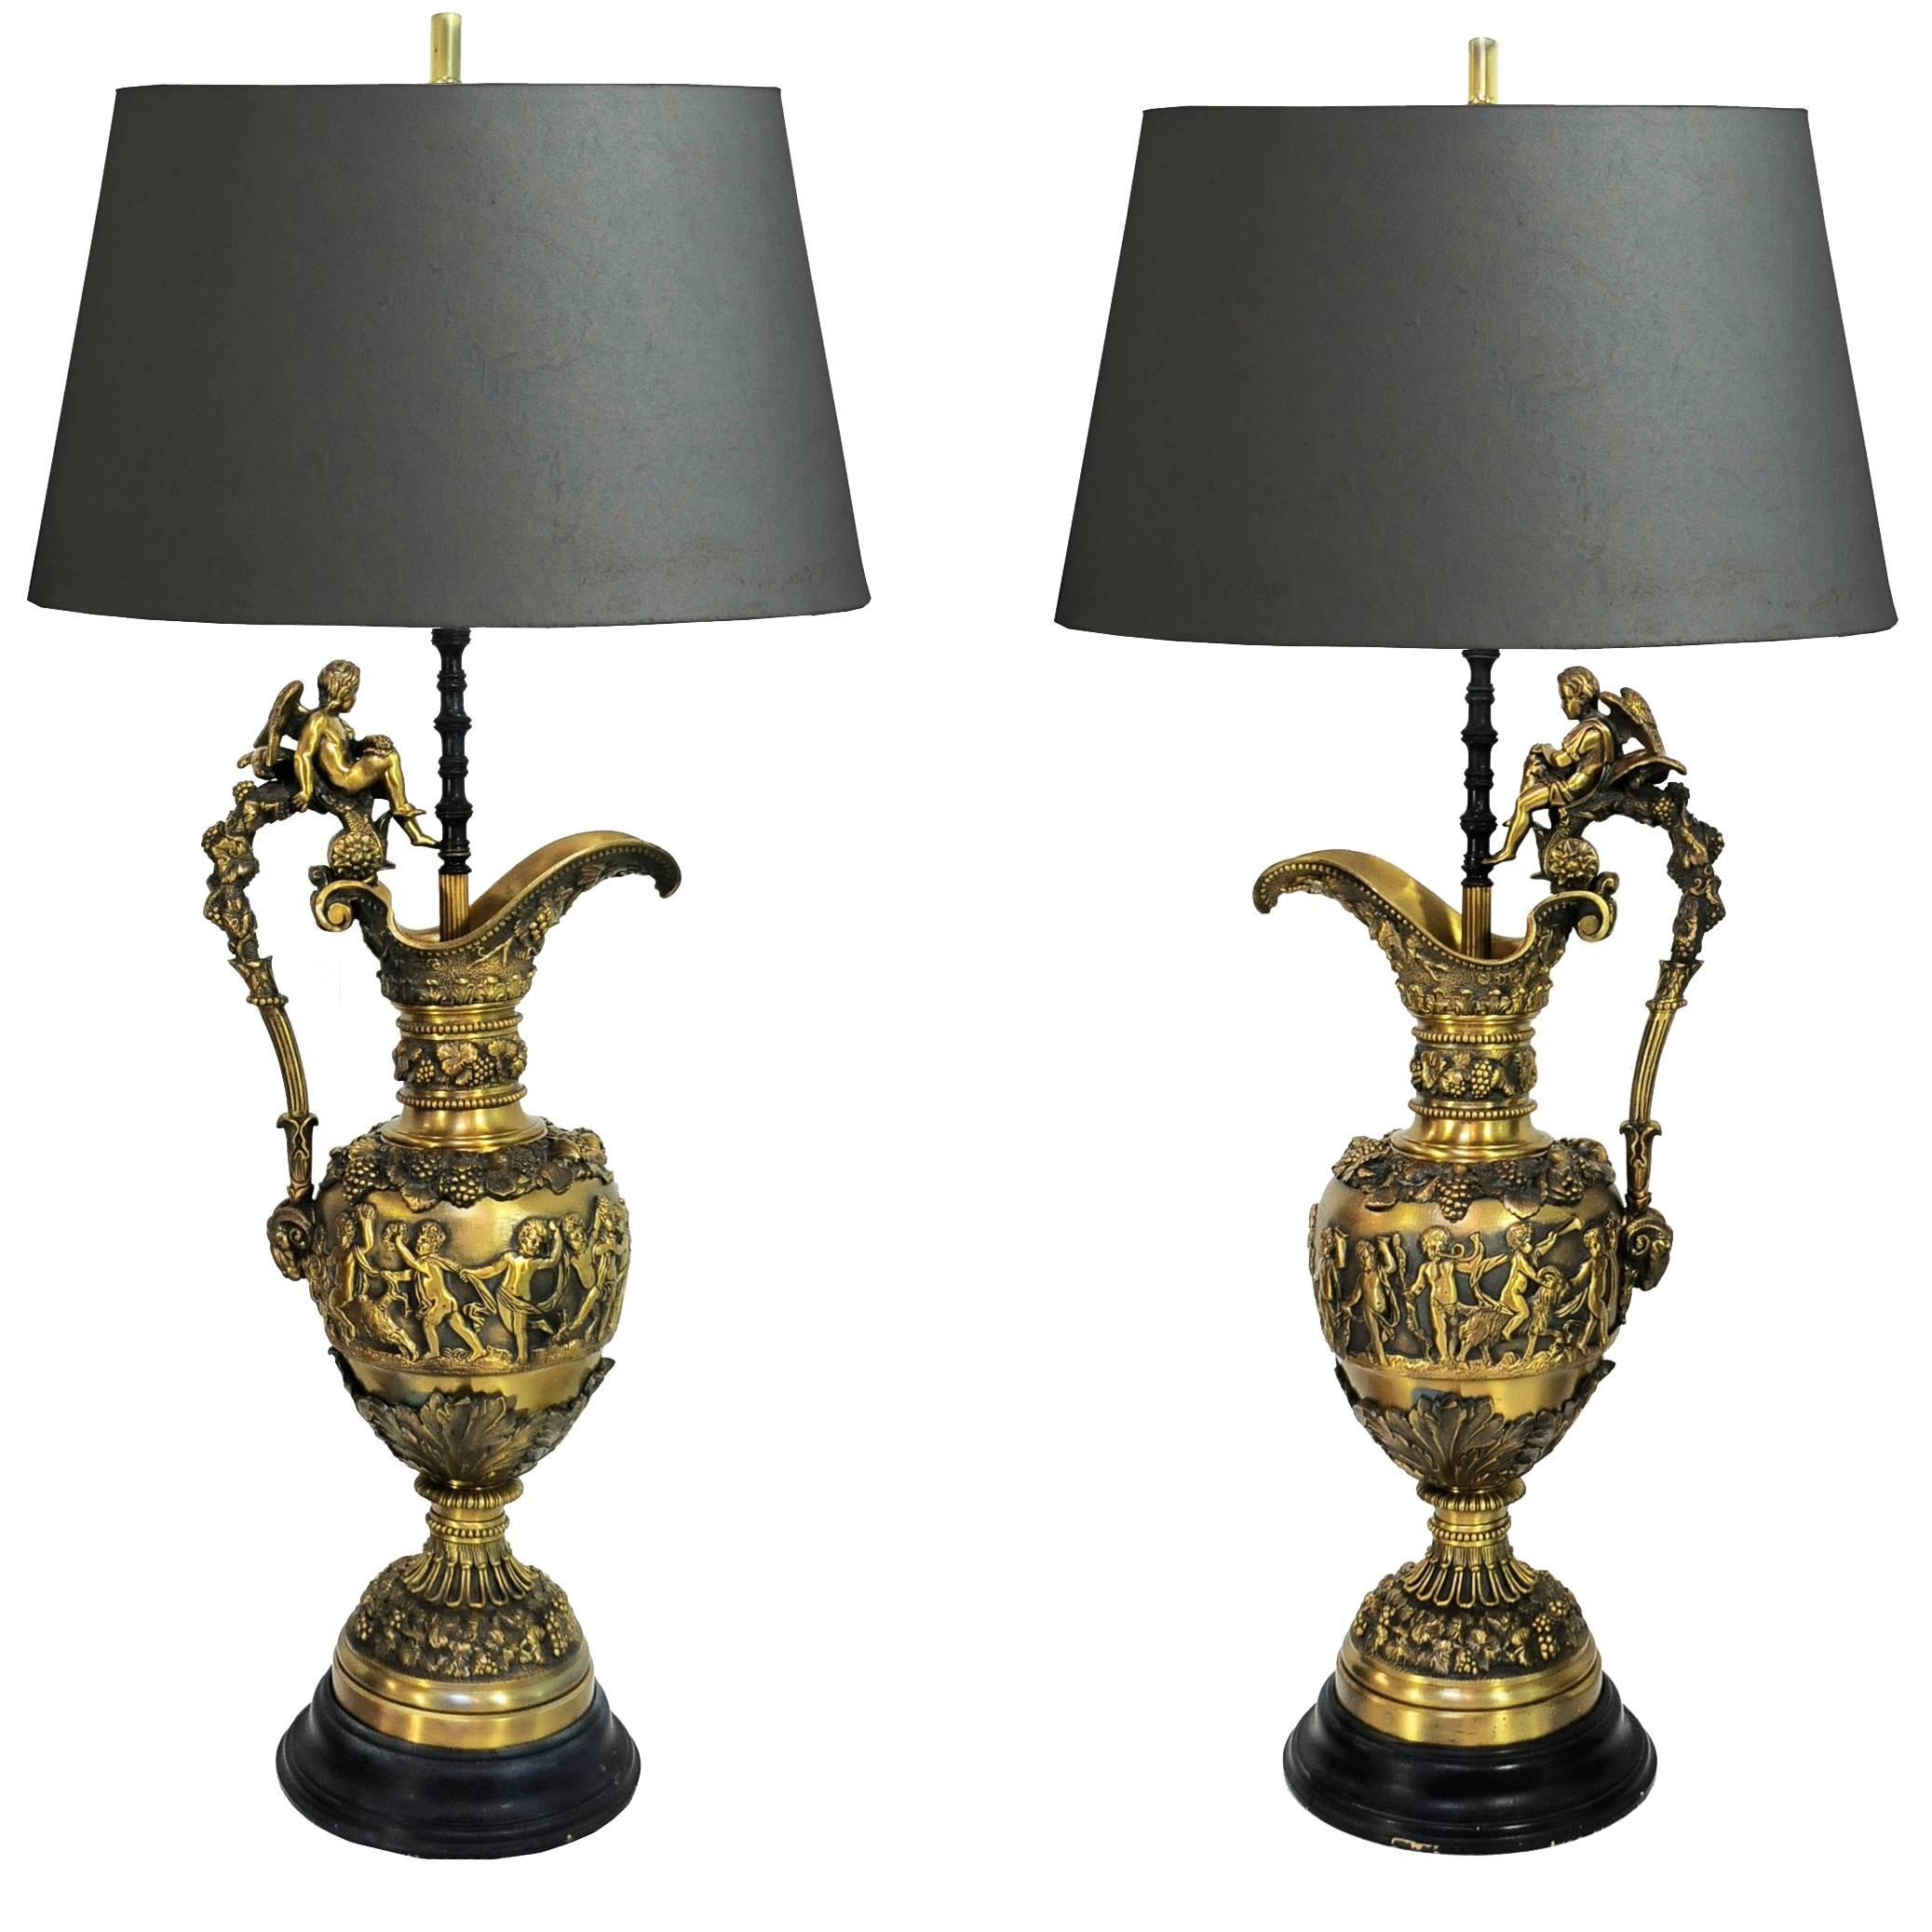 Pair of Figural Cherub & Rams Head French Neoclassical Bronze Ewer Table Lamps